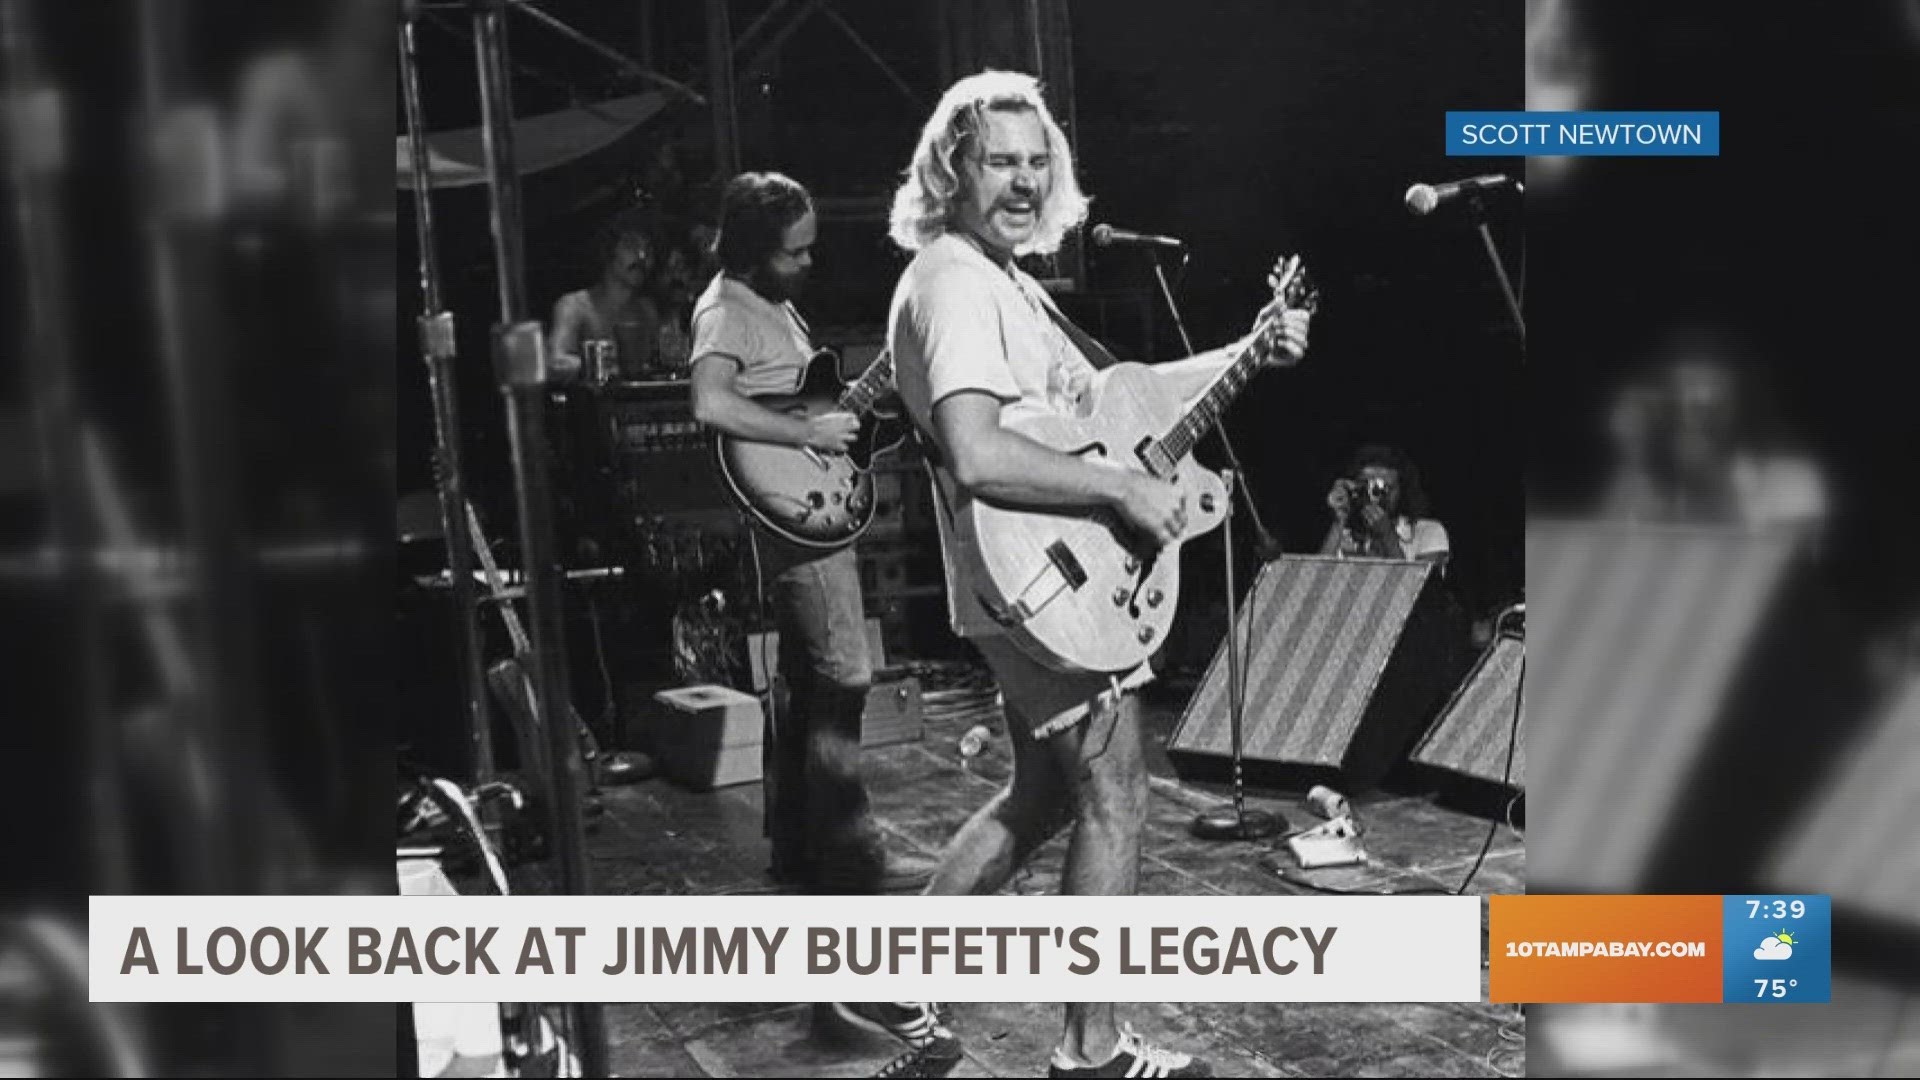 Jimmy Buffett may have celebrated slackers, but the "Margaritaville" singer was actually an astute, ambitious, aggressive businessman.